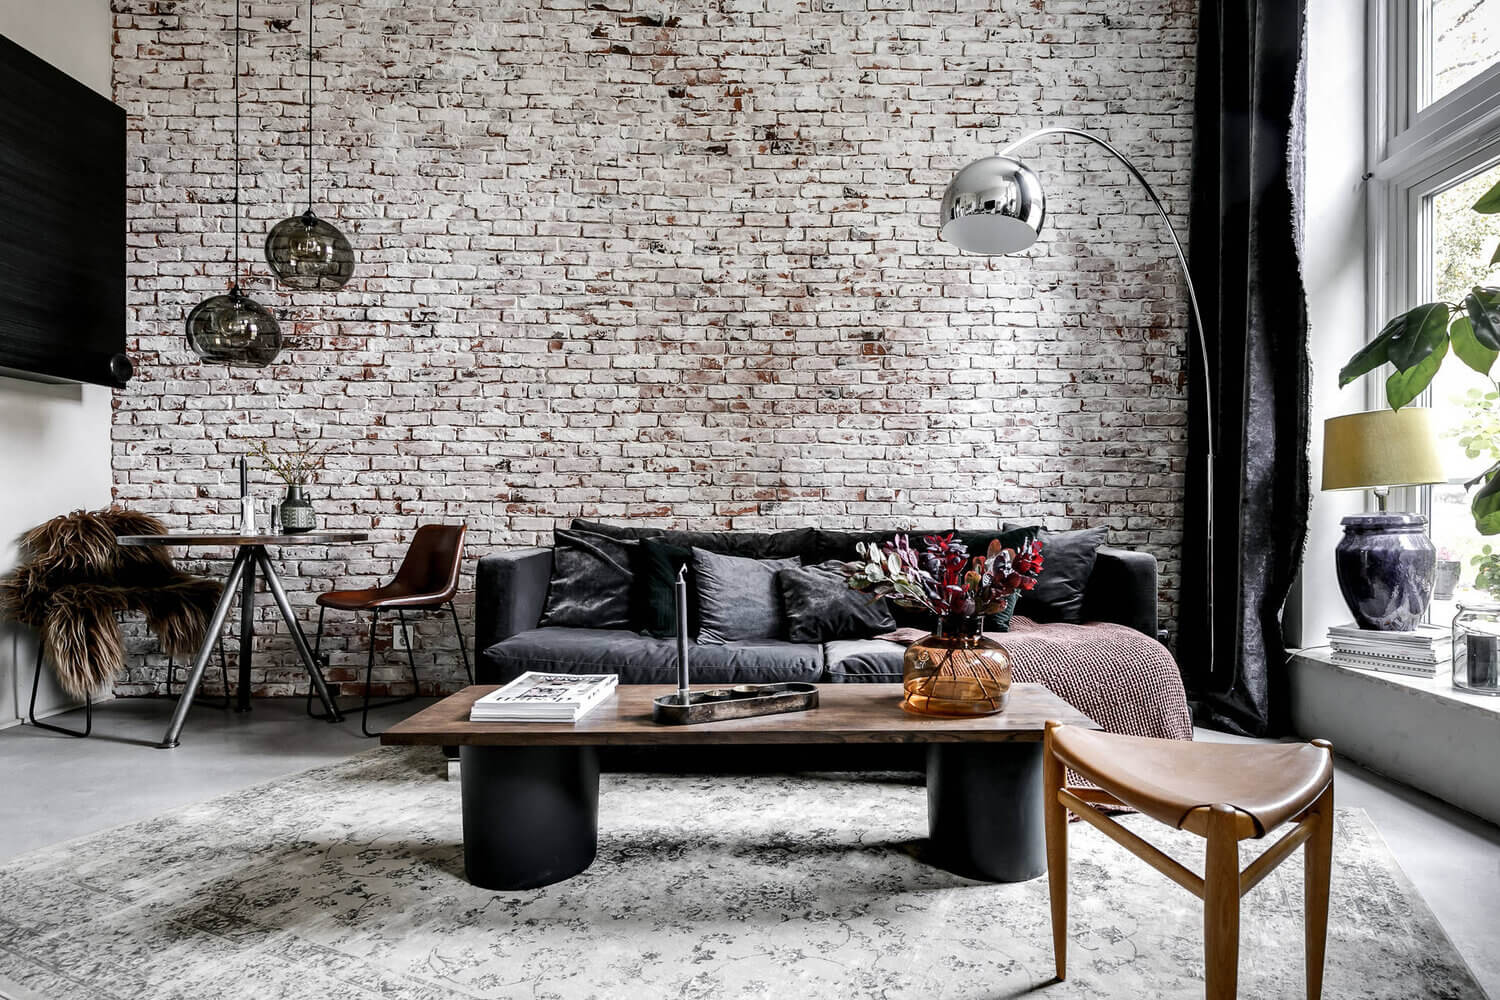 AnIndustrialScandinavianApartmentwithExposedBrickWall TheNordroom3 An Industrial Scandinavian Apartment with Exposed Brick Wall